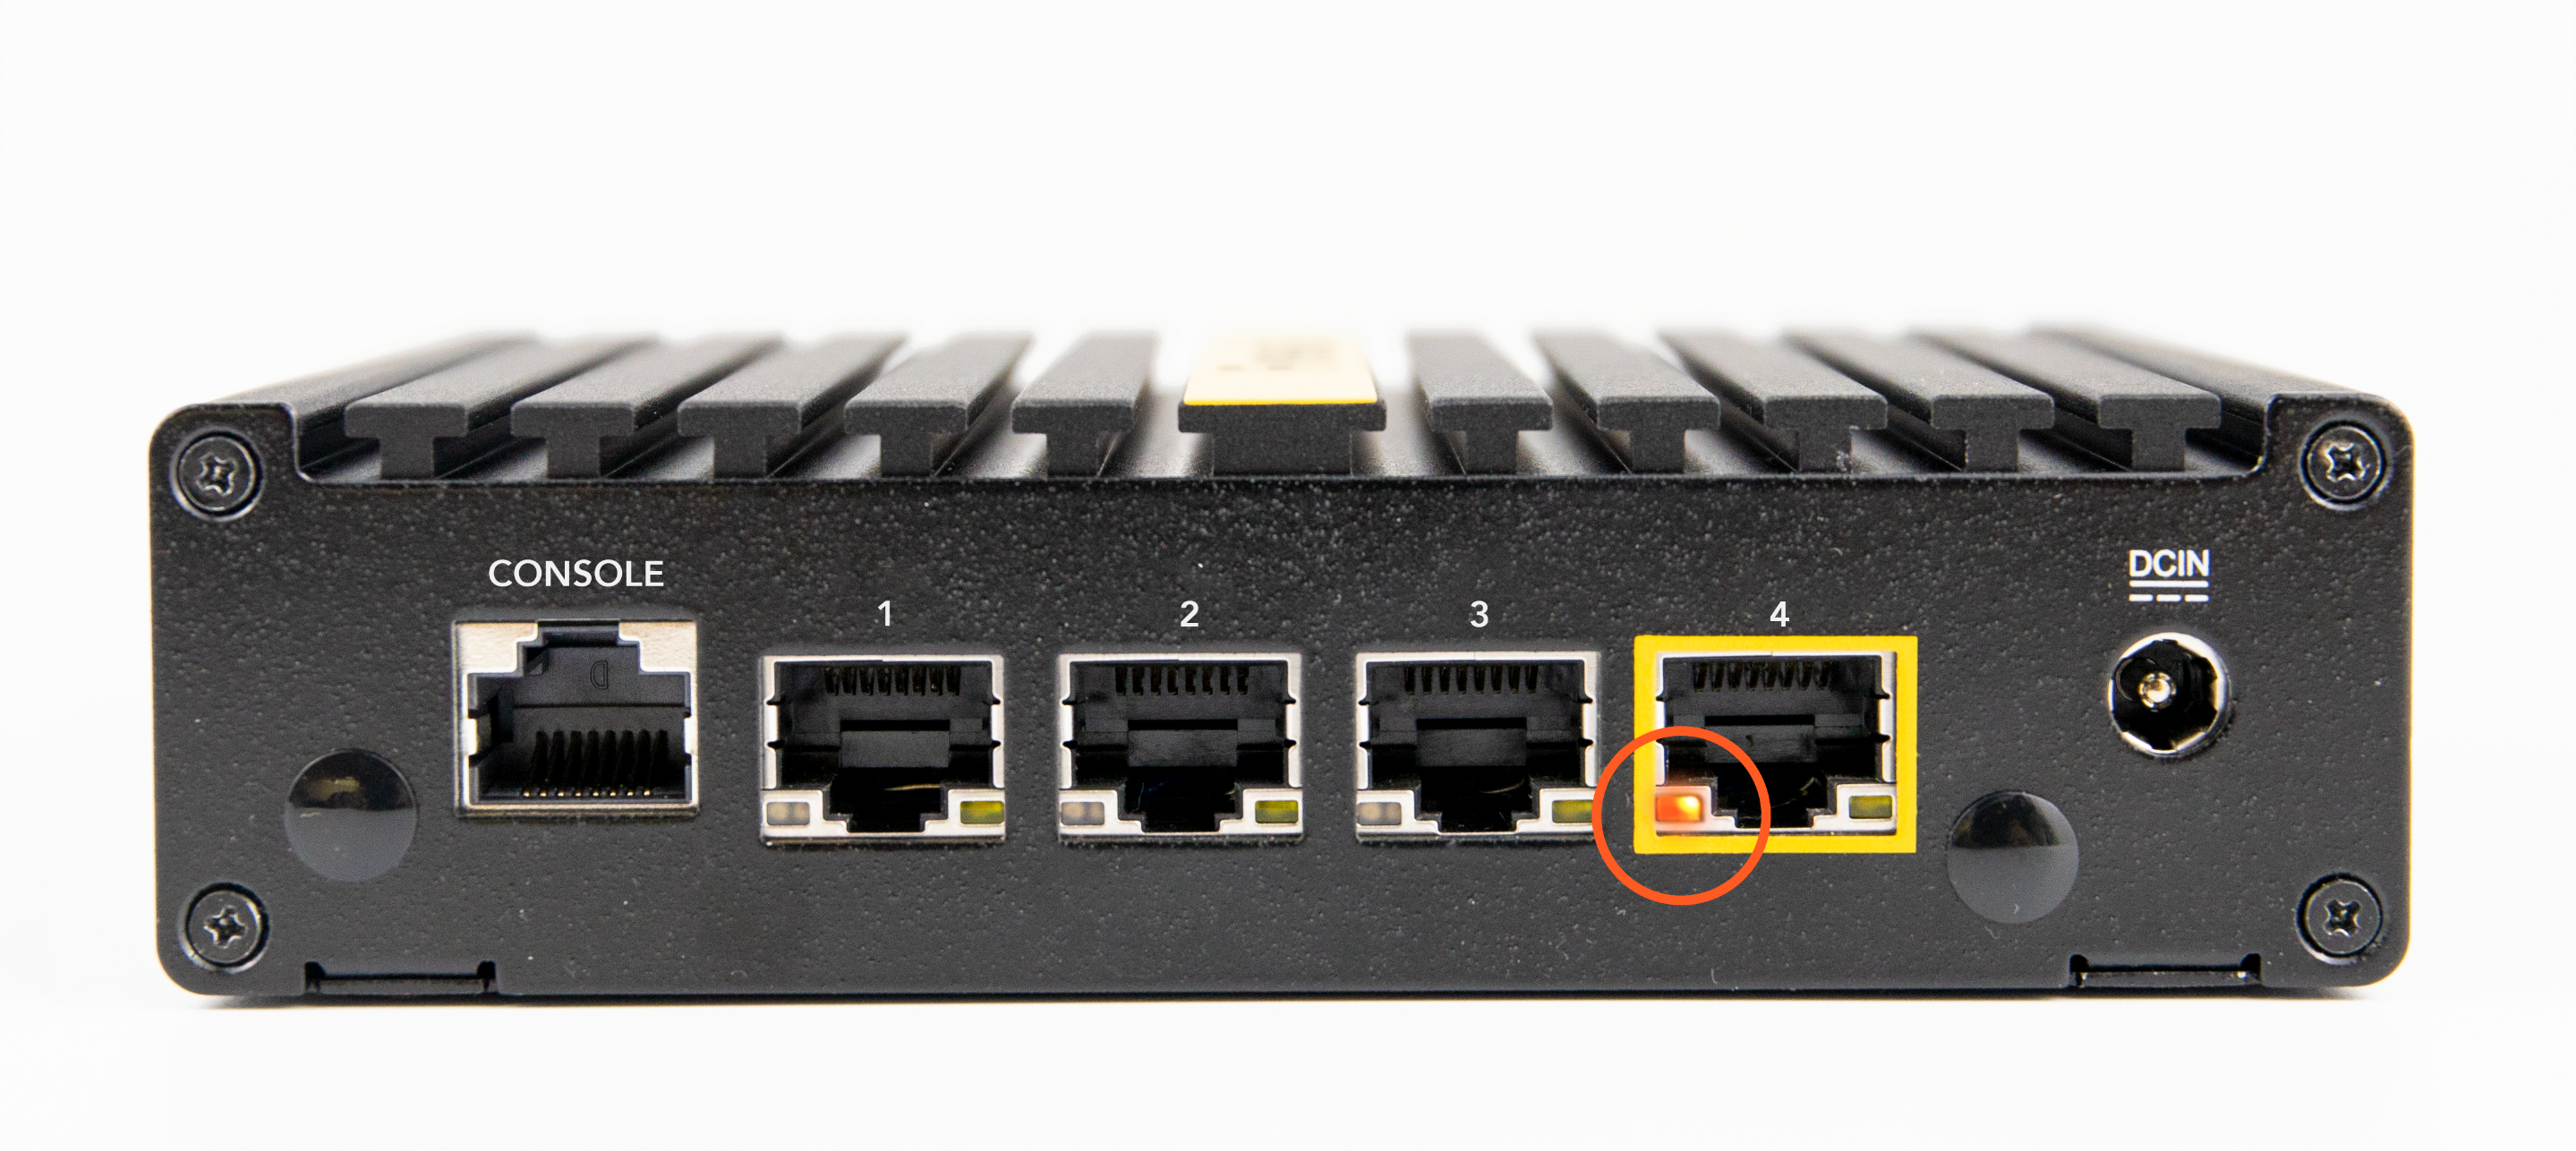 Check you connections on the router and make sure the ethernet lists of port 4 is on